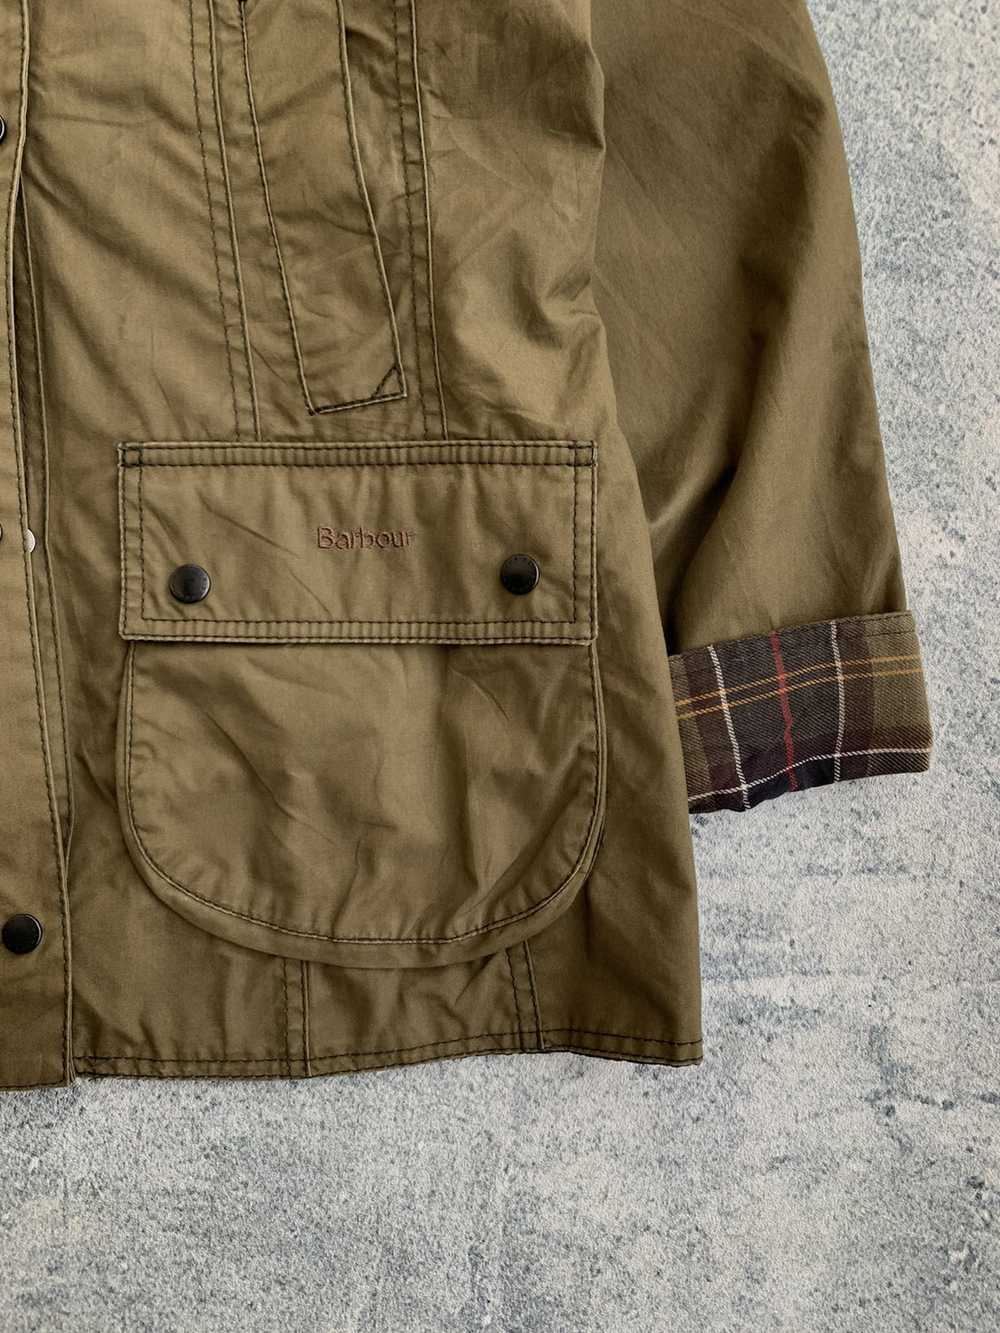 Barbour Barbour Beadnell Wax Jacket - image 3